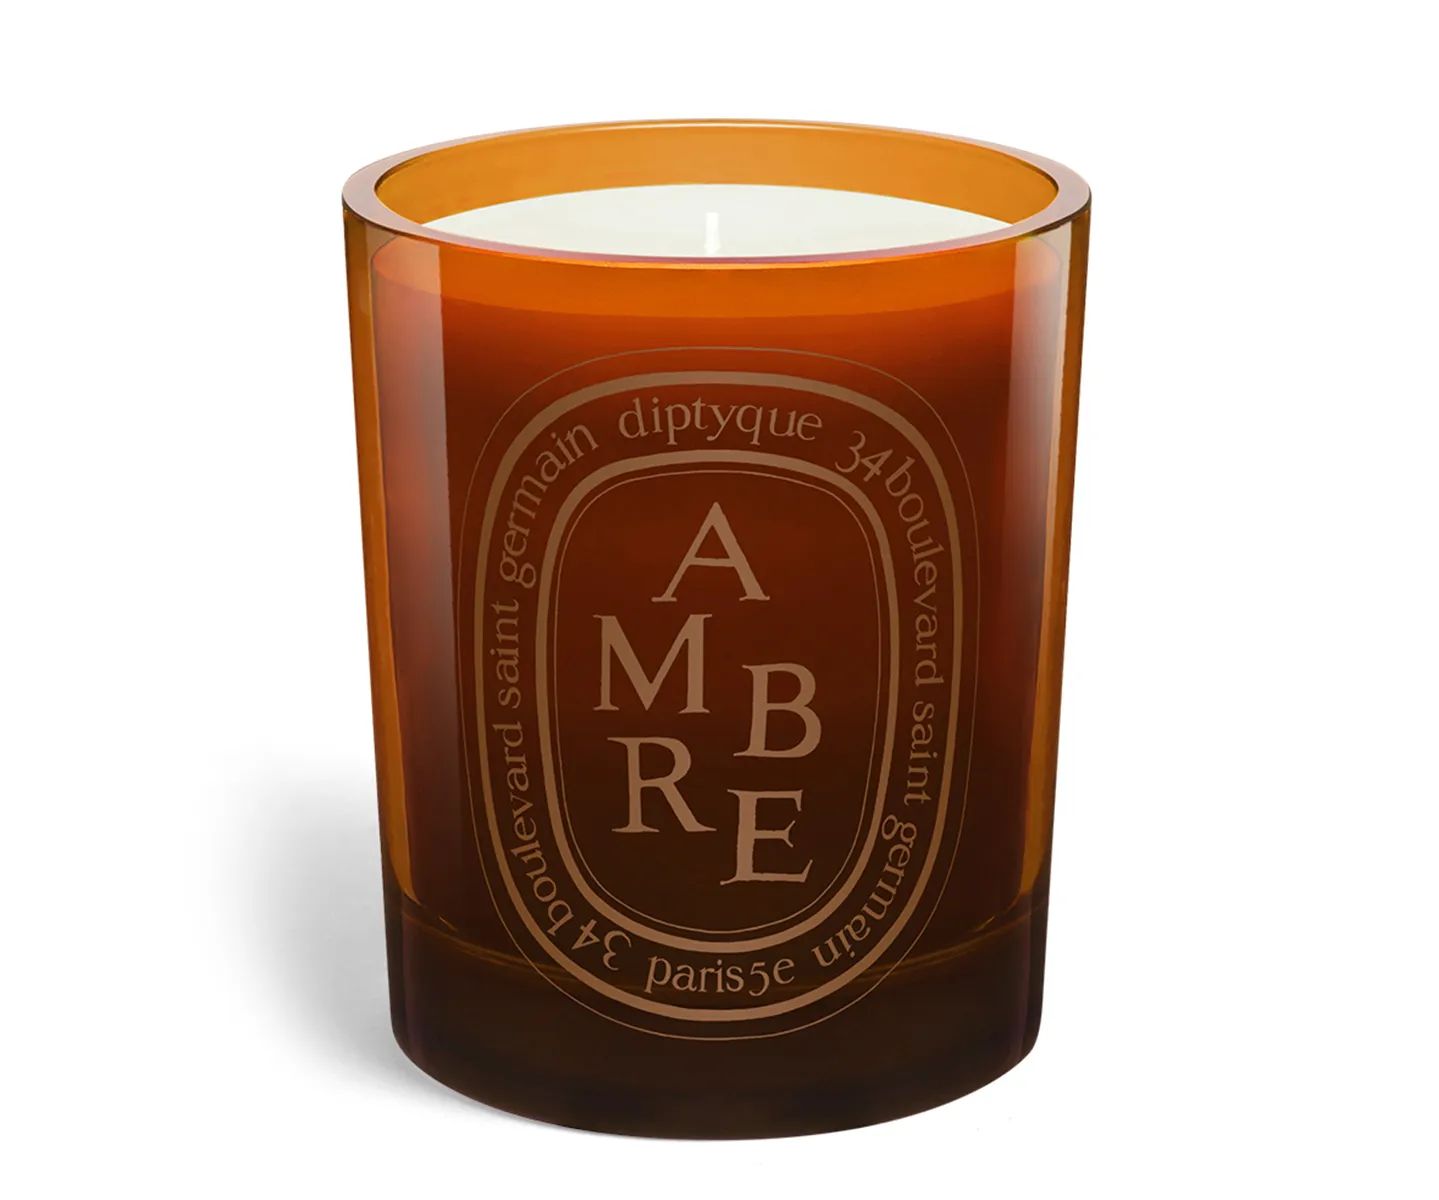 Ambre / Amber candle | diptyque (US)